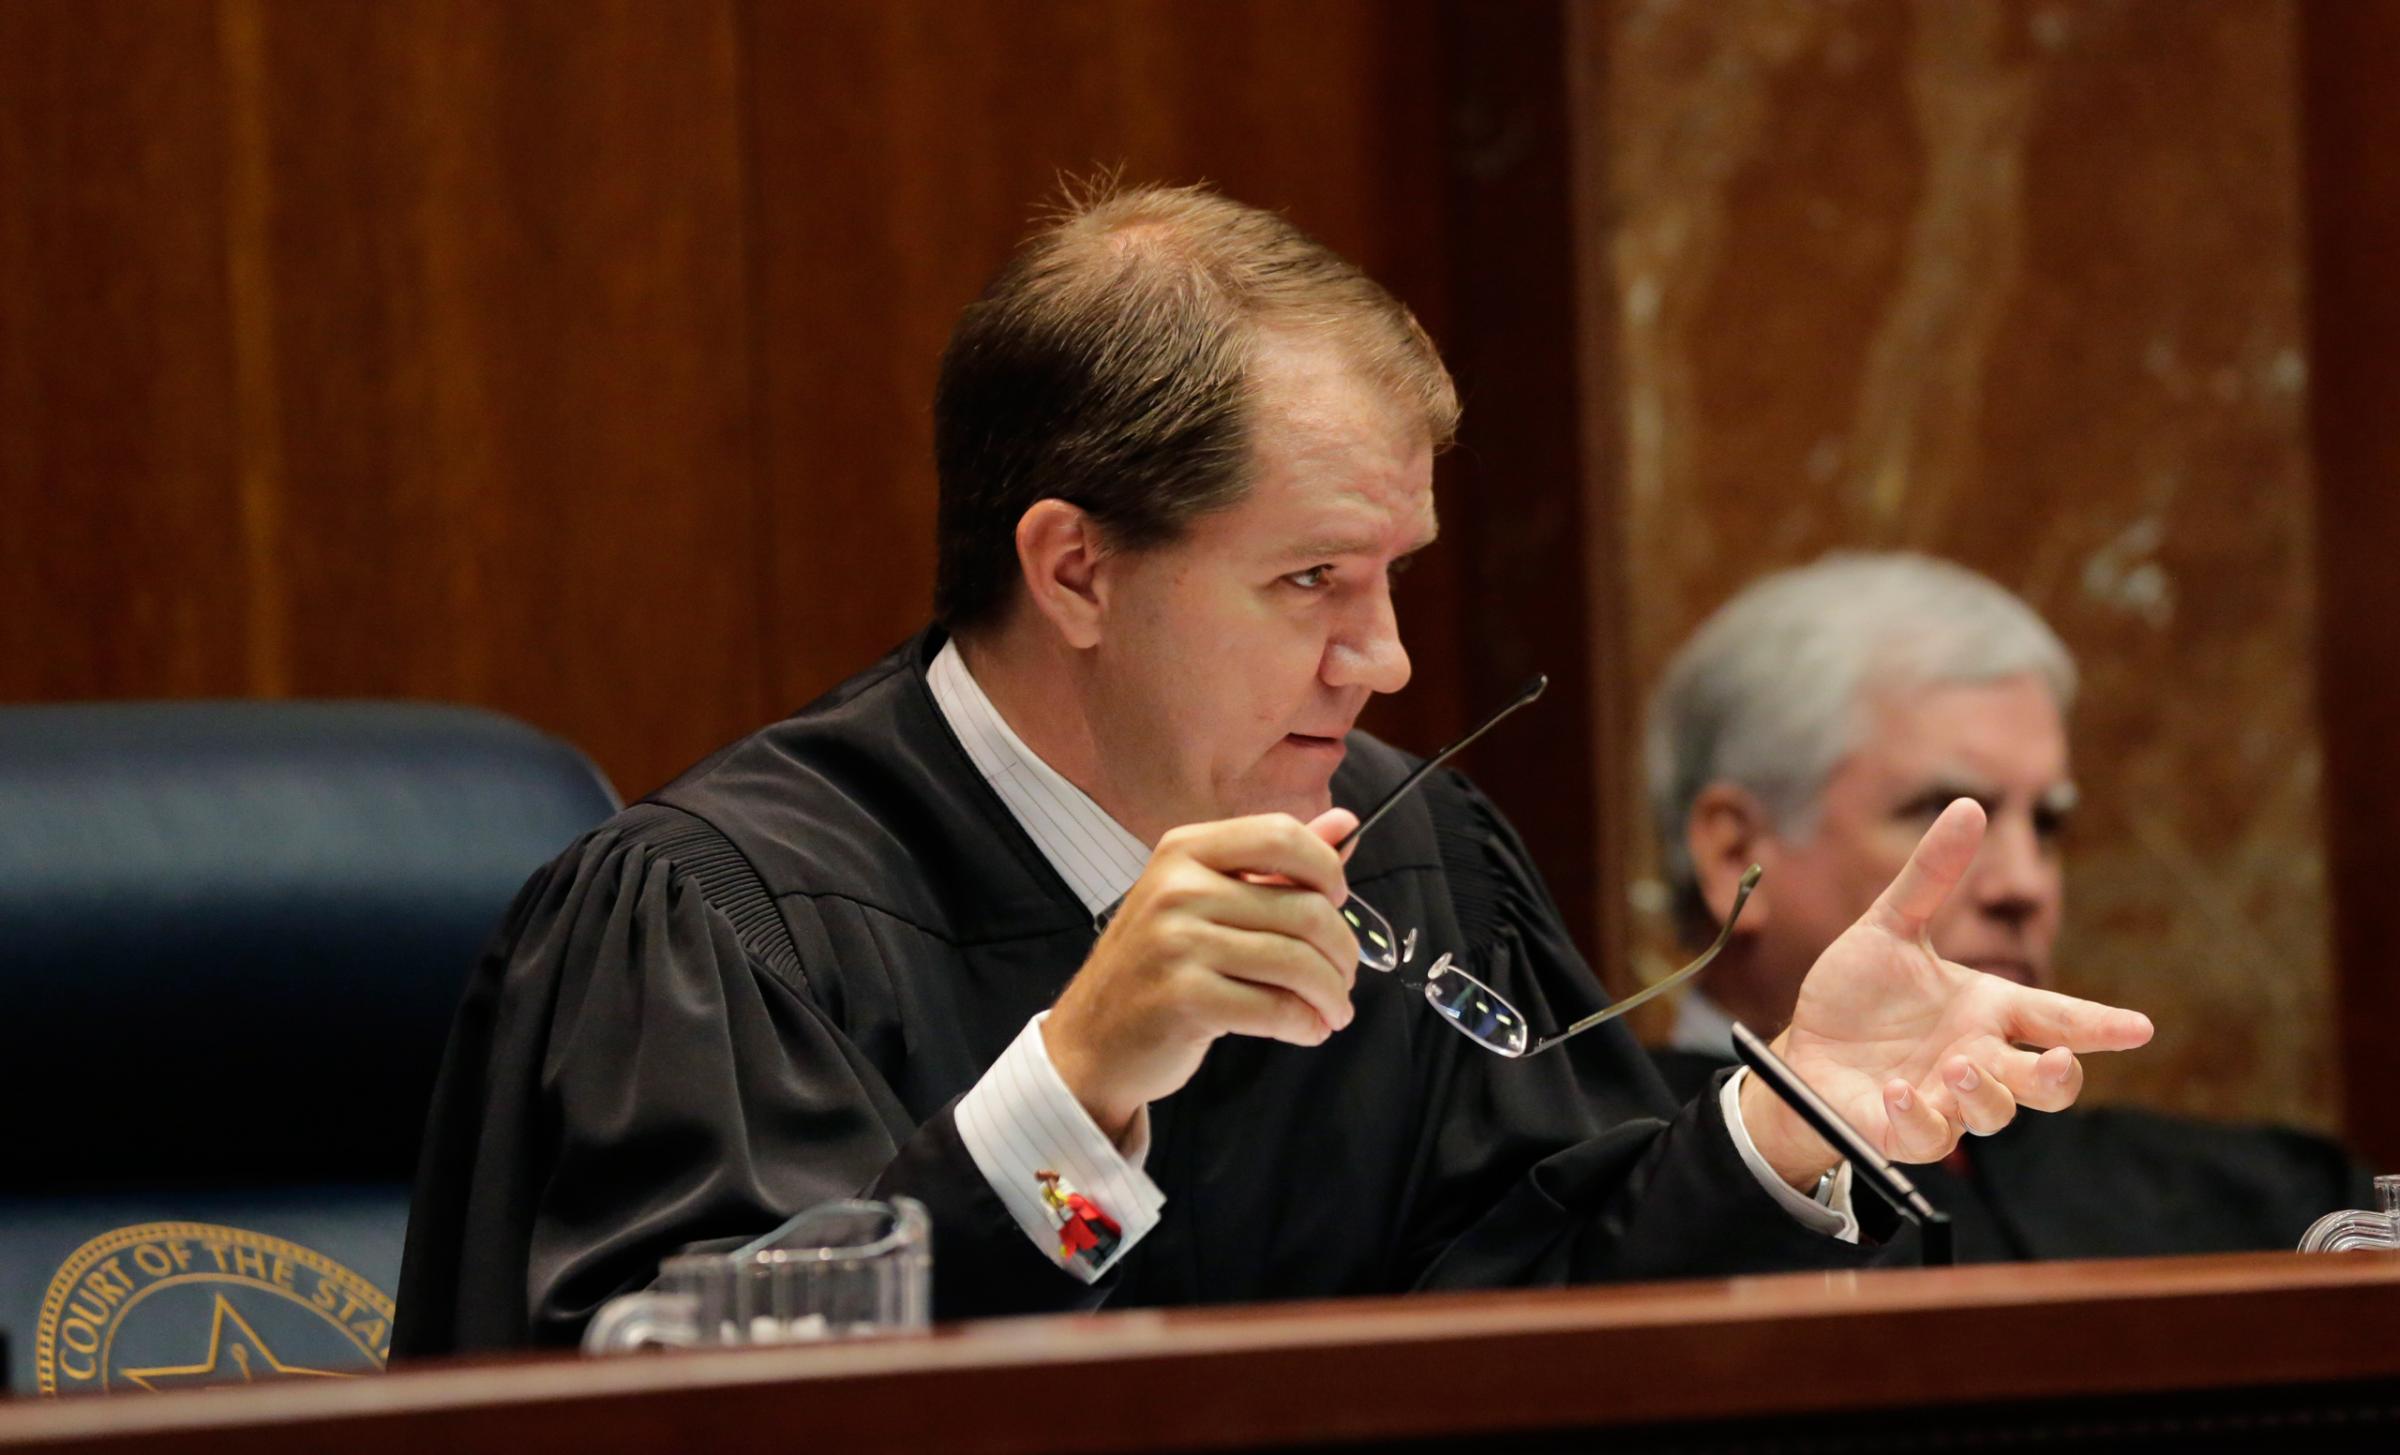 Texas Supreme Court Justice Don Willett, left, asks a question during oral arguments in Texas' latest school finance case at the state Supreme Court, Tuesday, Sept. 1, 2015, in Austin, Texas. Attorneys for more than 600 school districts suing Texas argue that the funding is inadequate and unfairly distributed, making it hard for students and schools to meet stringent academic standards. Attorney General Ken Paxton's office counters that, while not perfect, public education money meets state constitutional requirements for an efficient system providing a "general diffusion of knowledge."(AP Photo/Eric Gay)